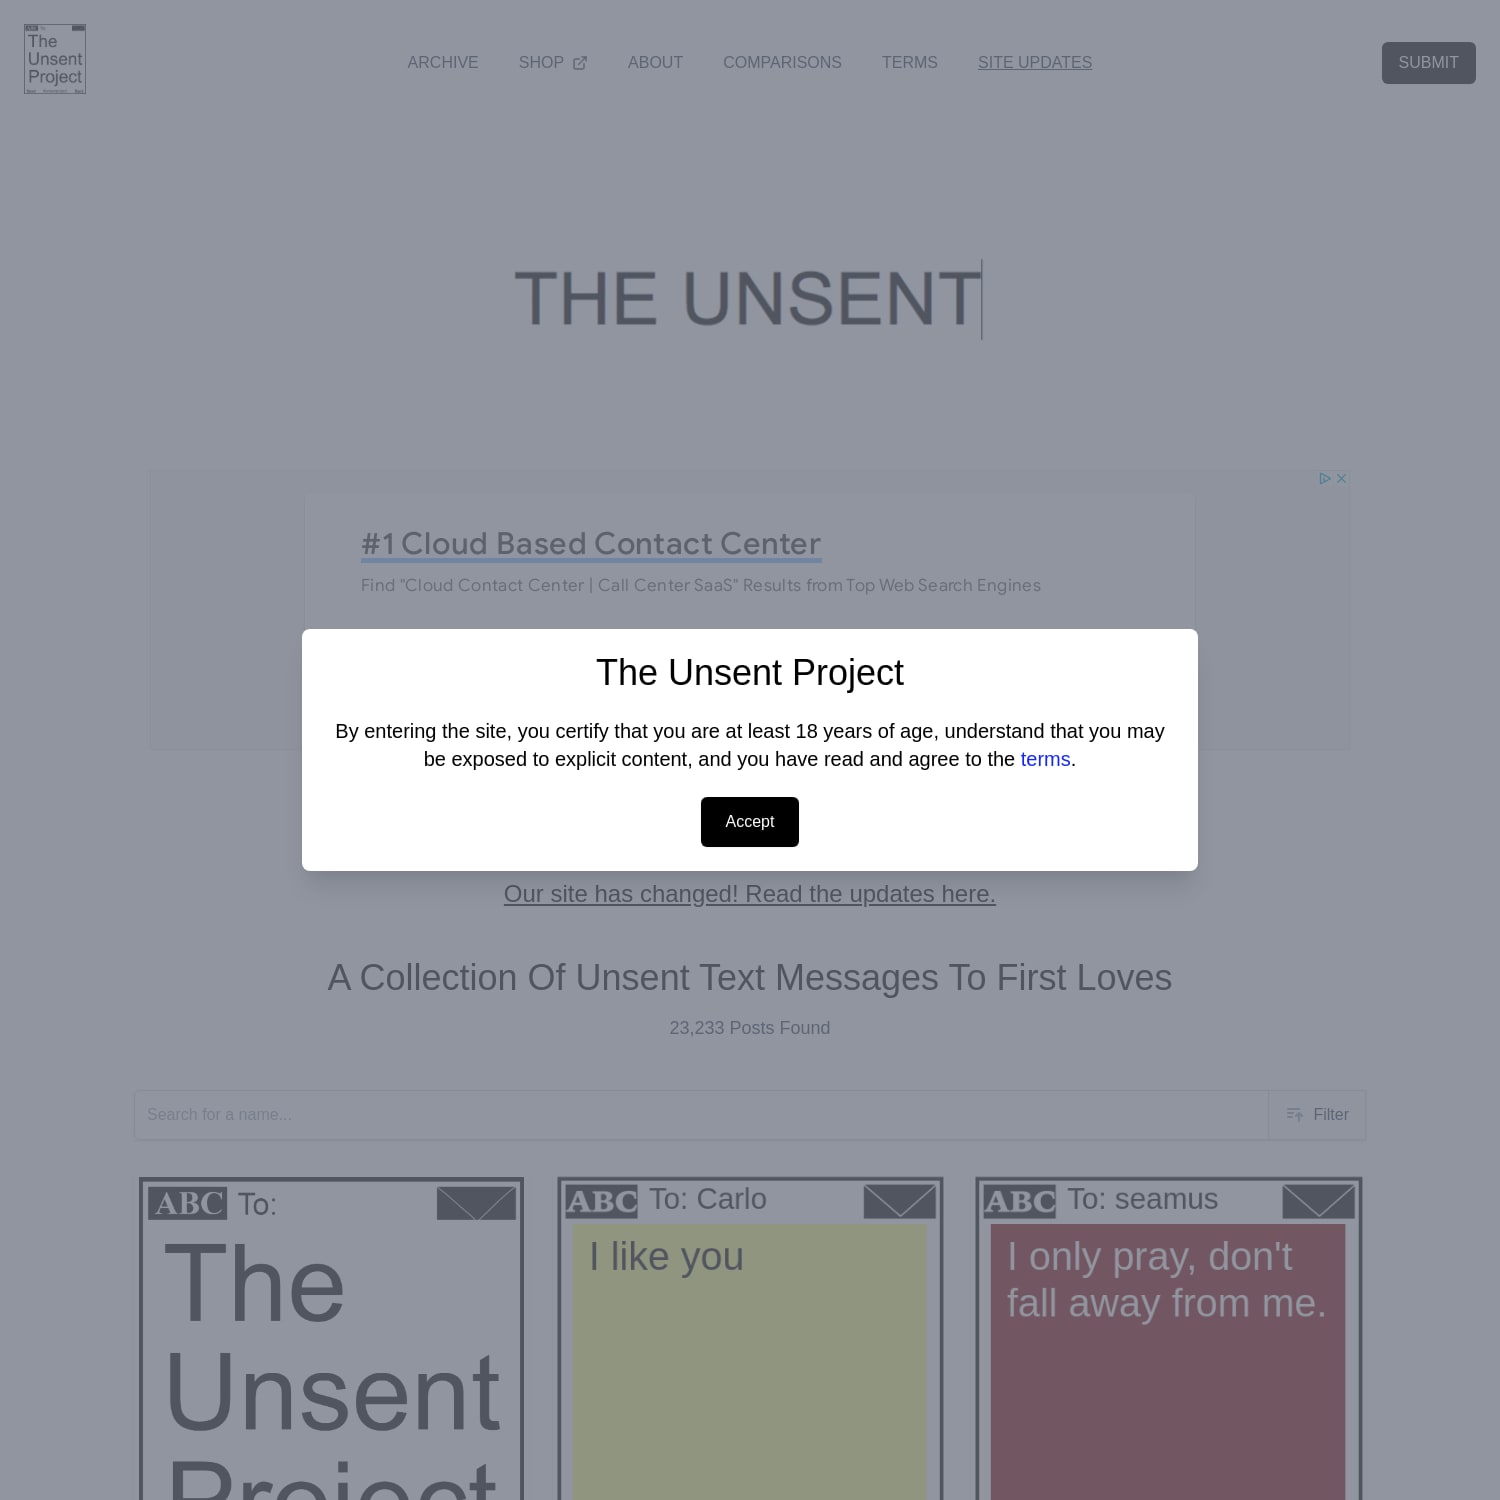 The Unsent Project was started in 2015 to figure out what color people see love in. It has A collection of unsent text messages to first loves, and you can add yours too.